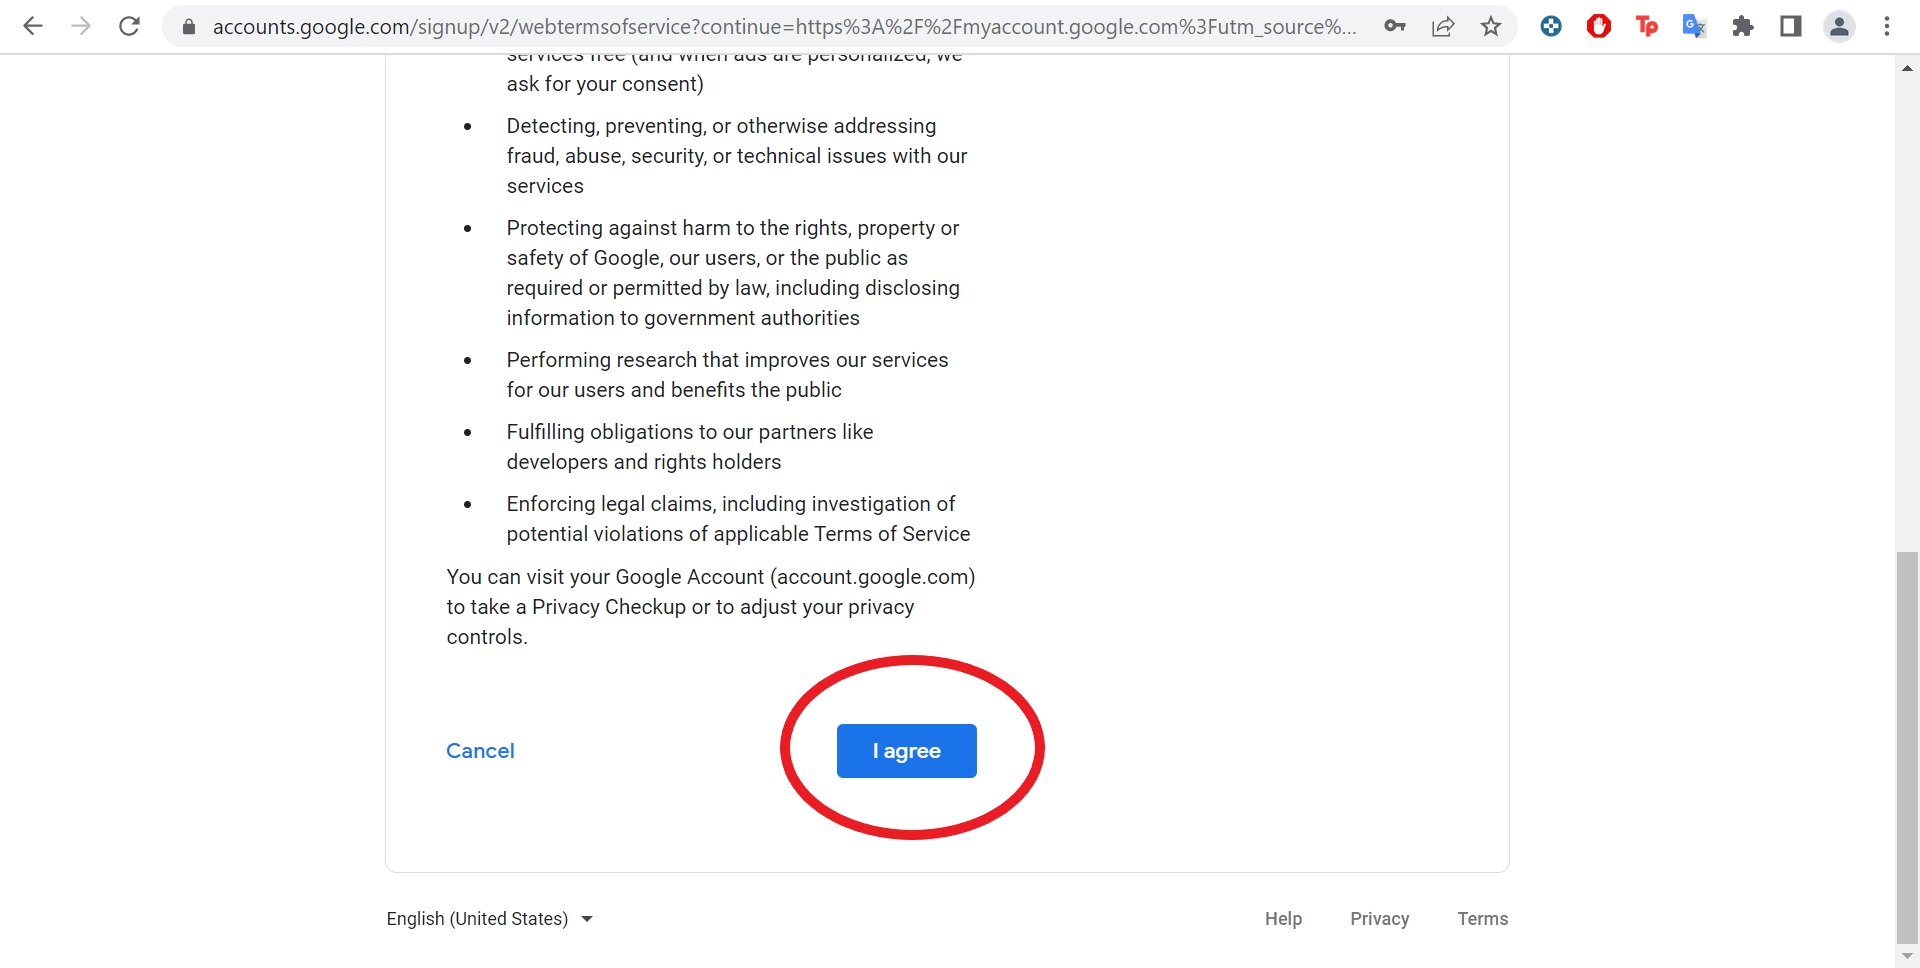 Google account privacy policy and terms of service